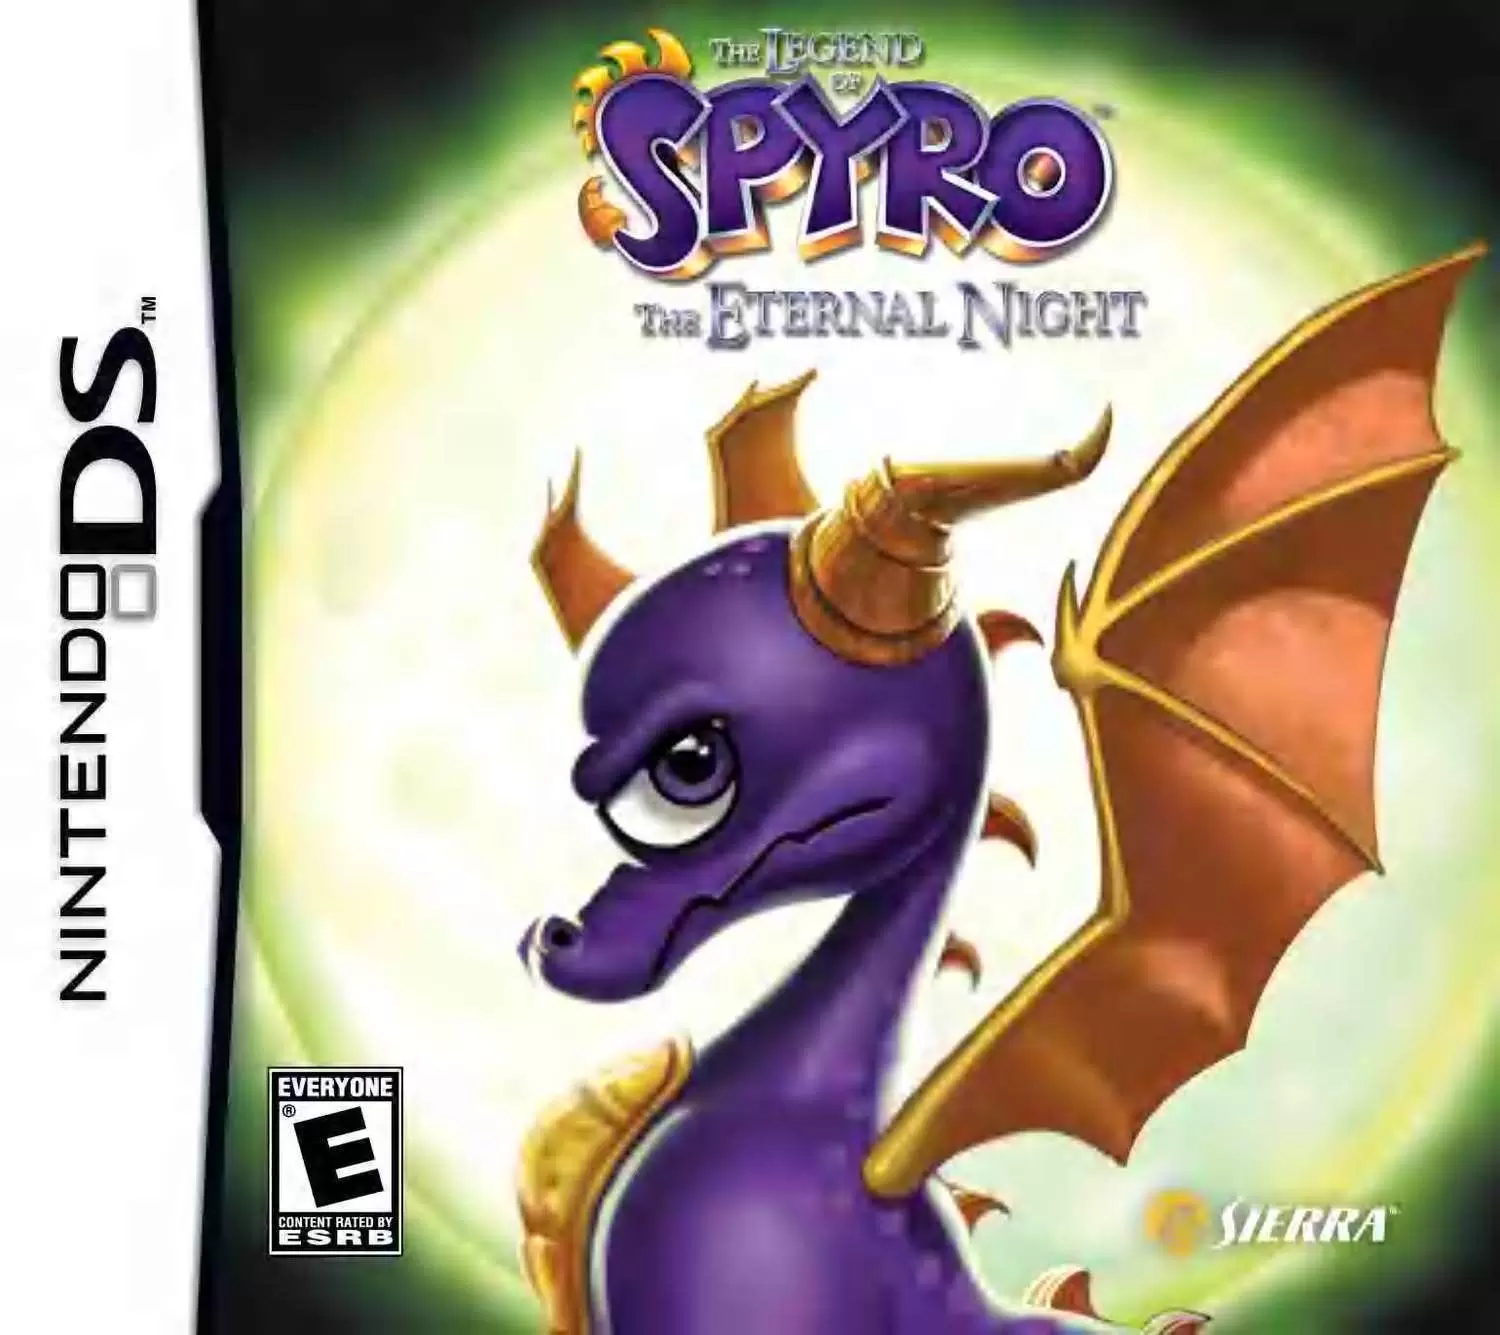 The Legend of Spyro The Eternal Night Playstation 2 PS2 game